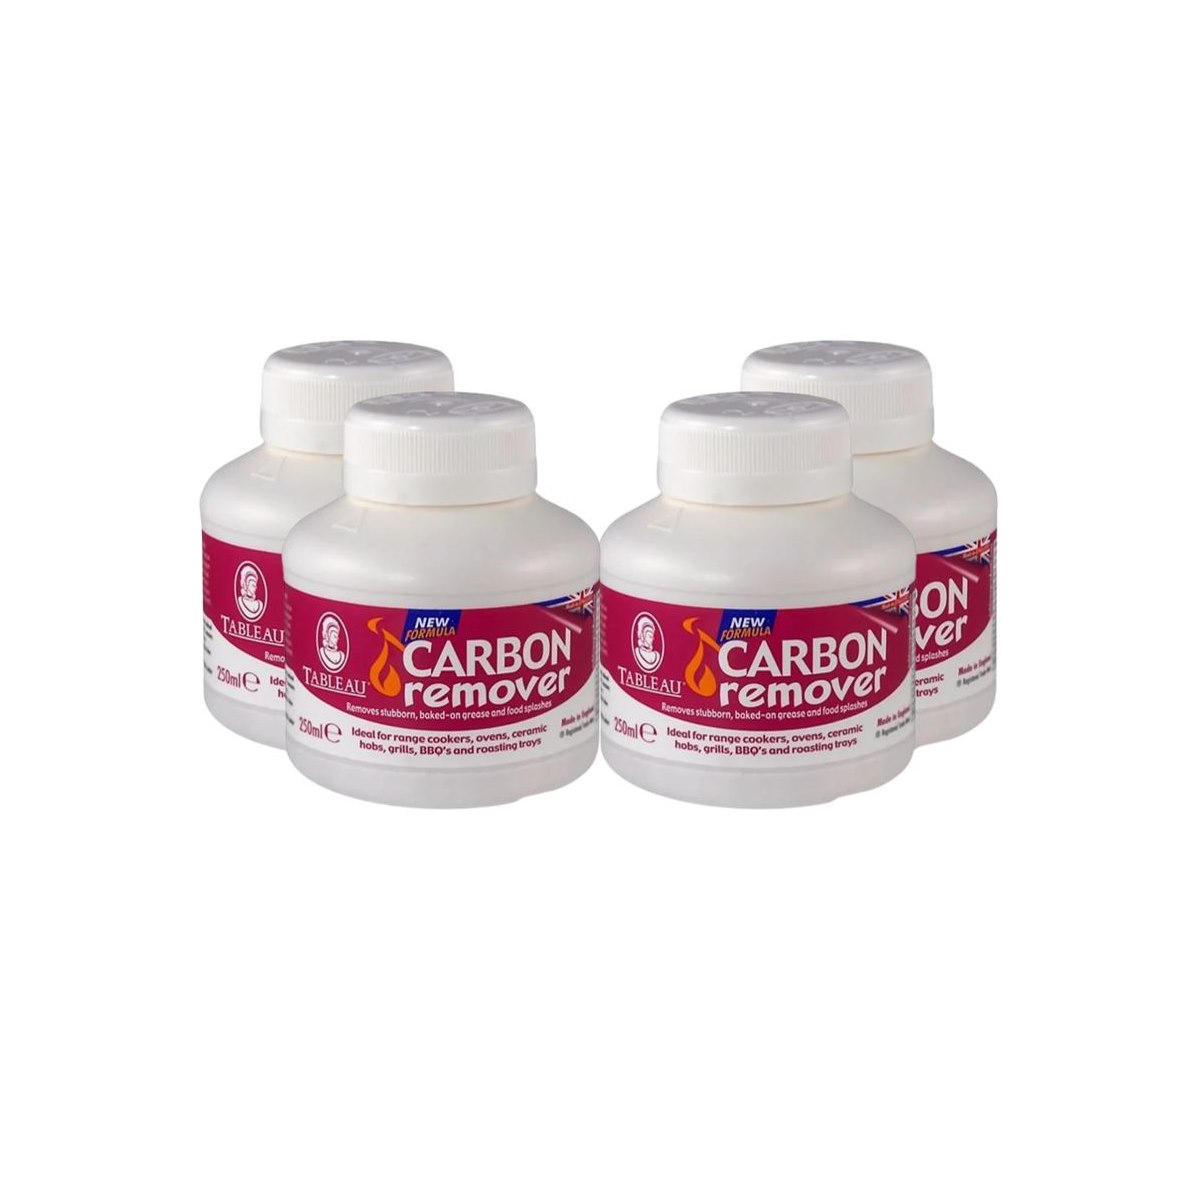 Case of 4 x Tableau Carbon Remover 250ml